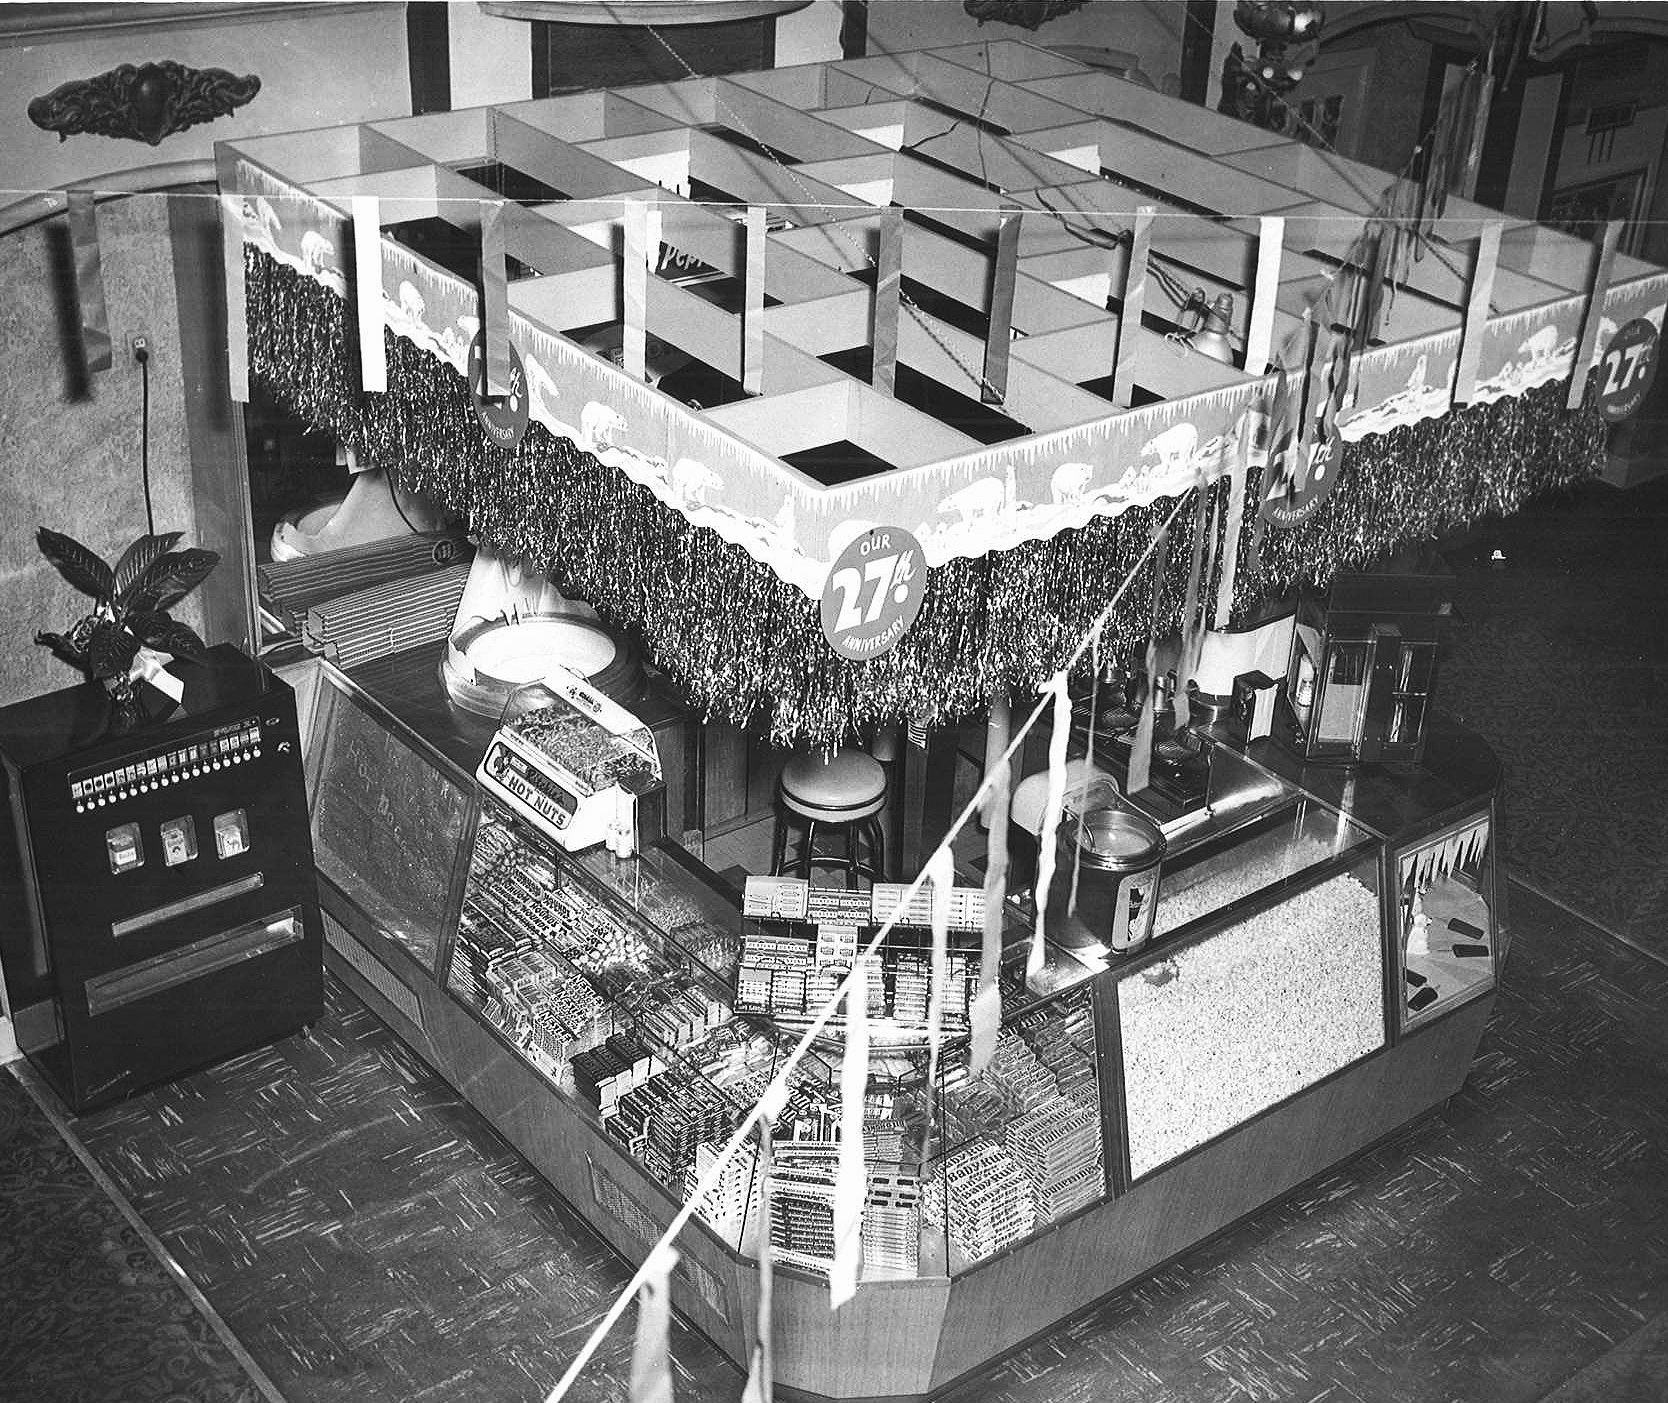 LOBBY CONCESSIONS STAND, 1951